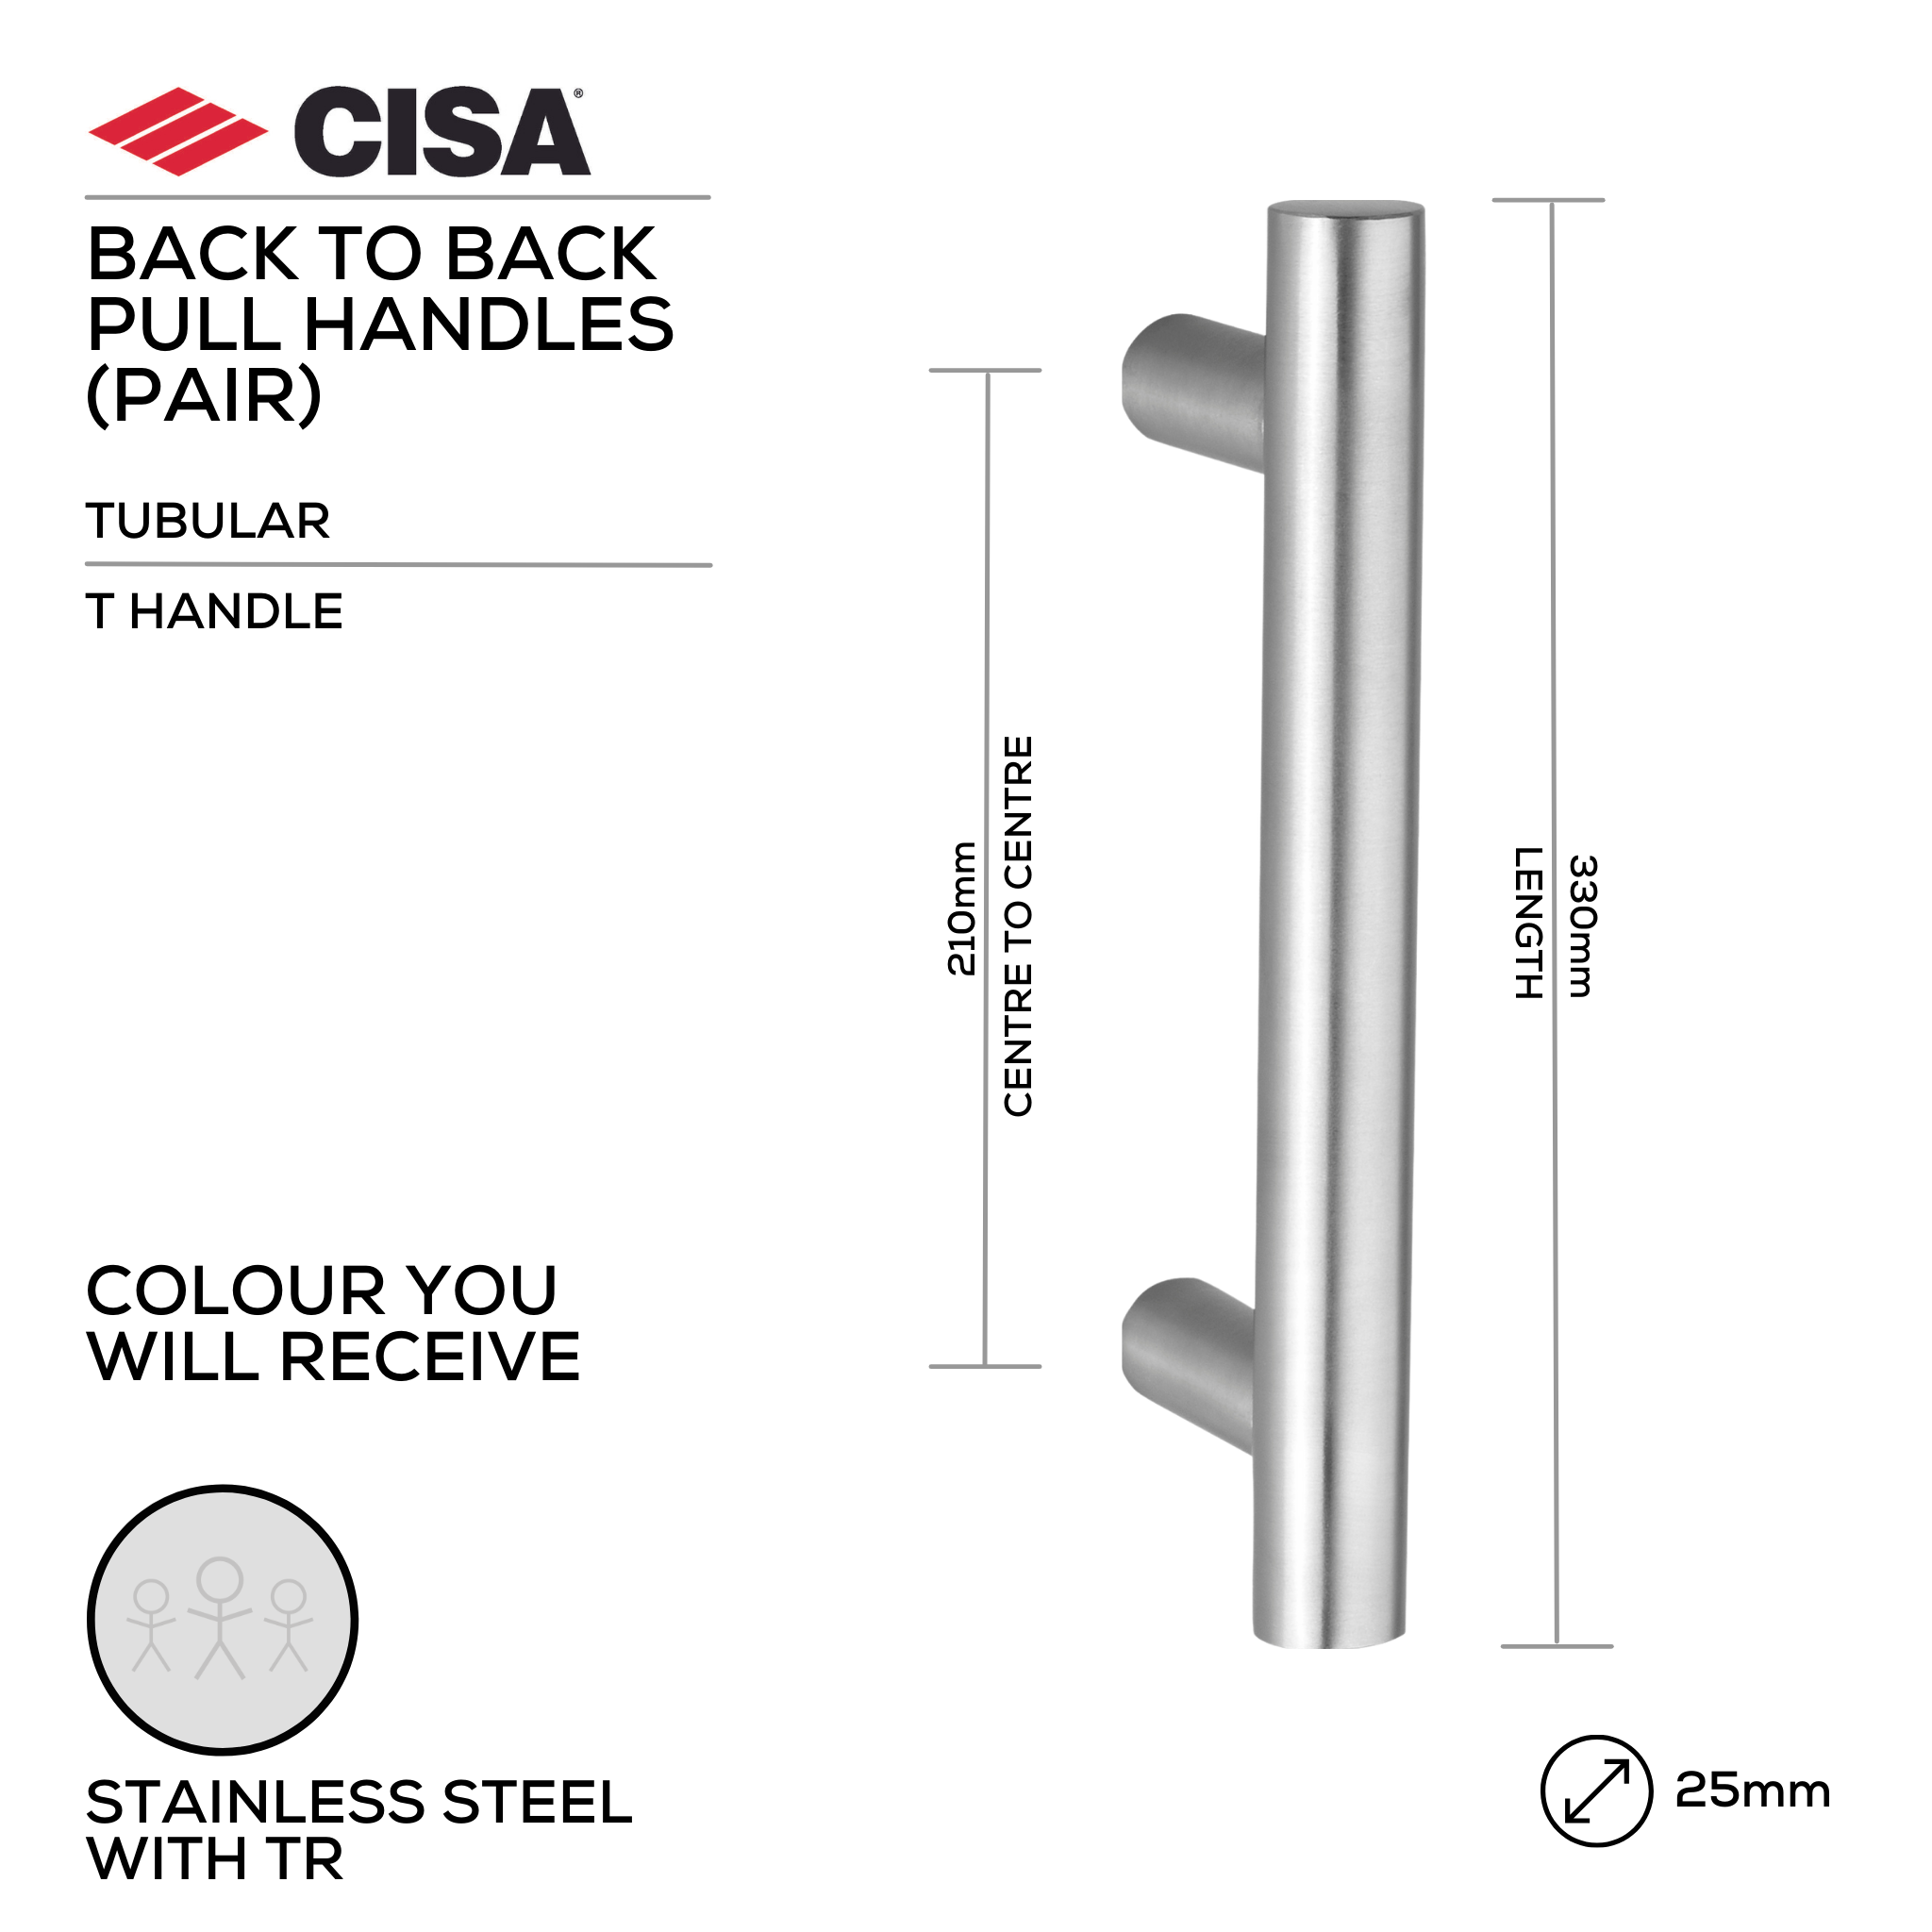 FP.T02.BB.TR, Pull Handle, Tubular, T Handle, BTB, 25mm (Ø) x 330mm (l) x 210mm (ctc), Stainless Steel with Tarnish Resistant, CISA